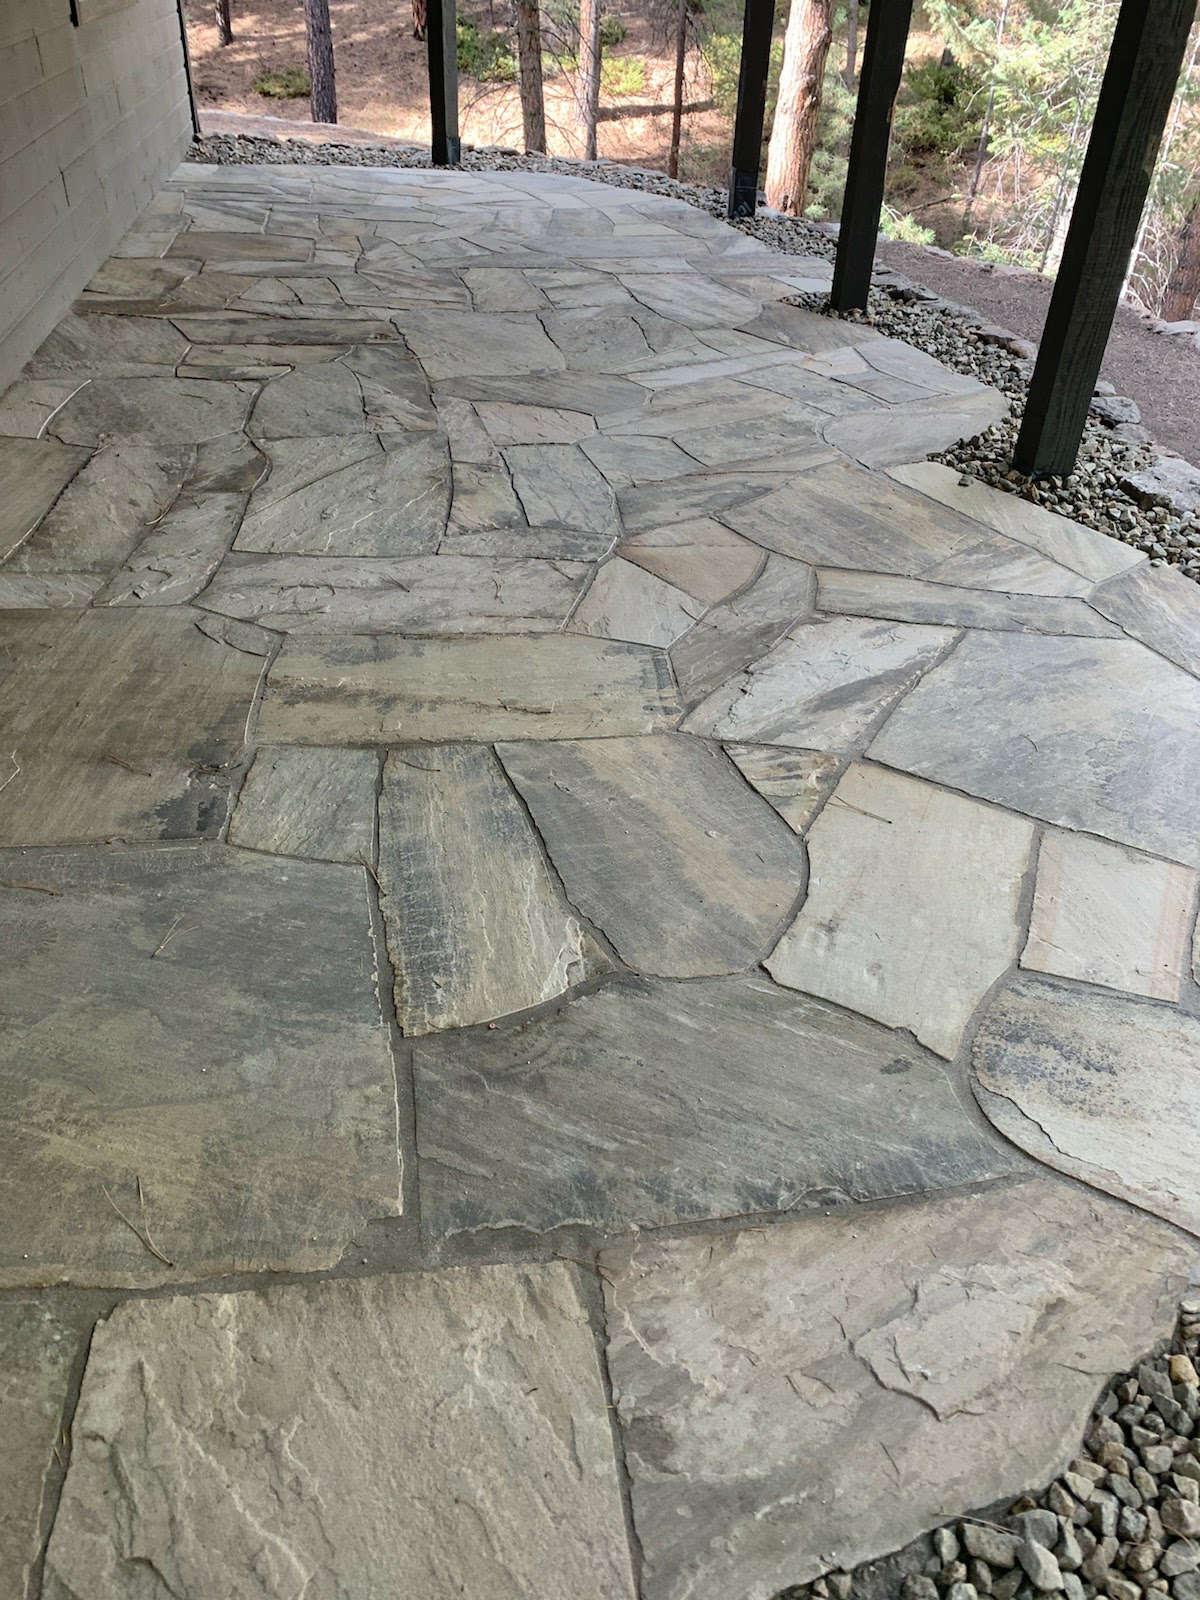 Covered patio made of gray flagstones